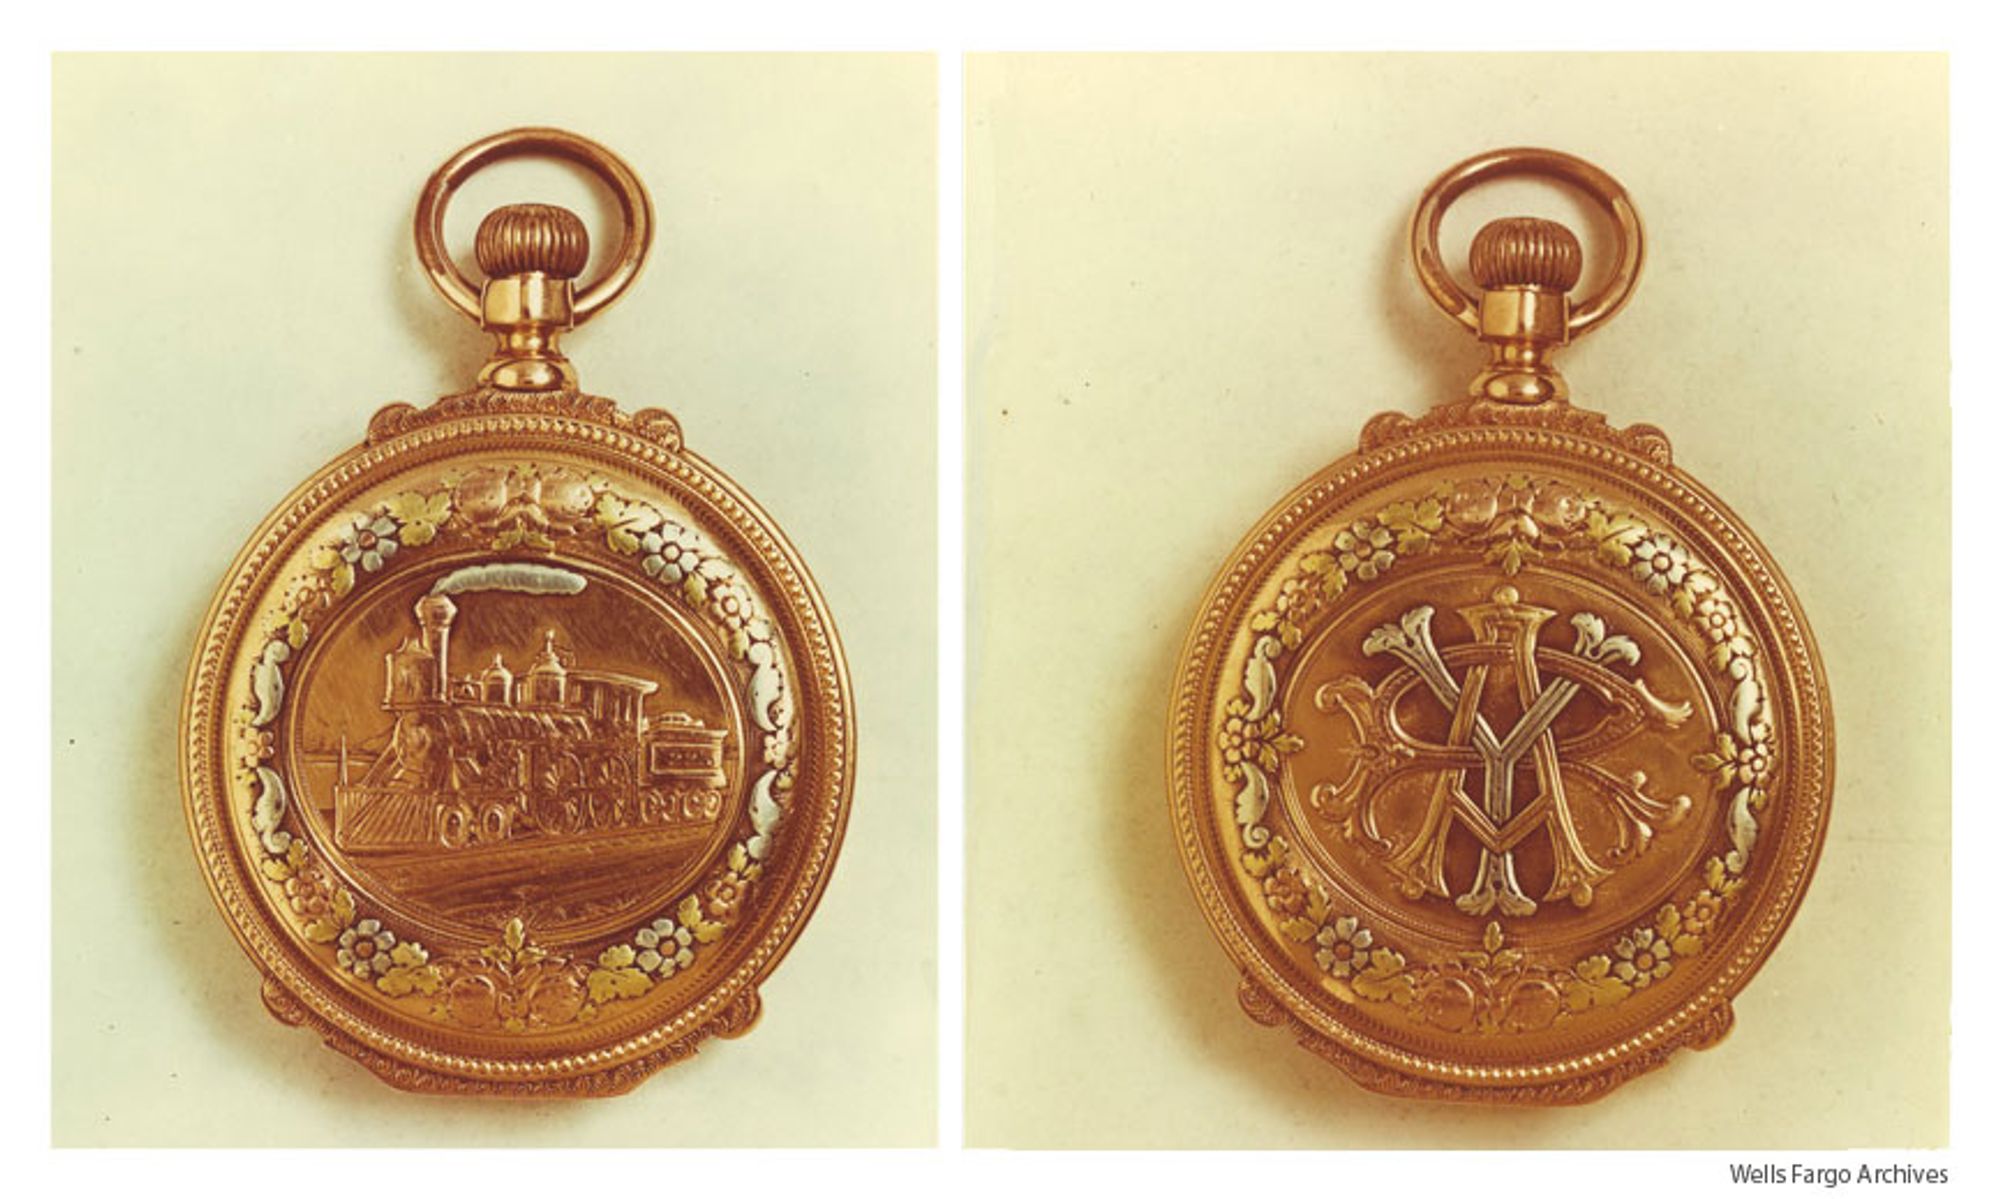 Pocket watch sent to Ross from John J. Valentine for his heroism. 